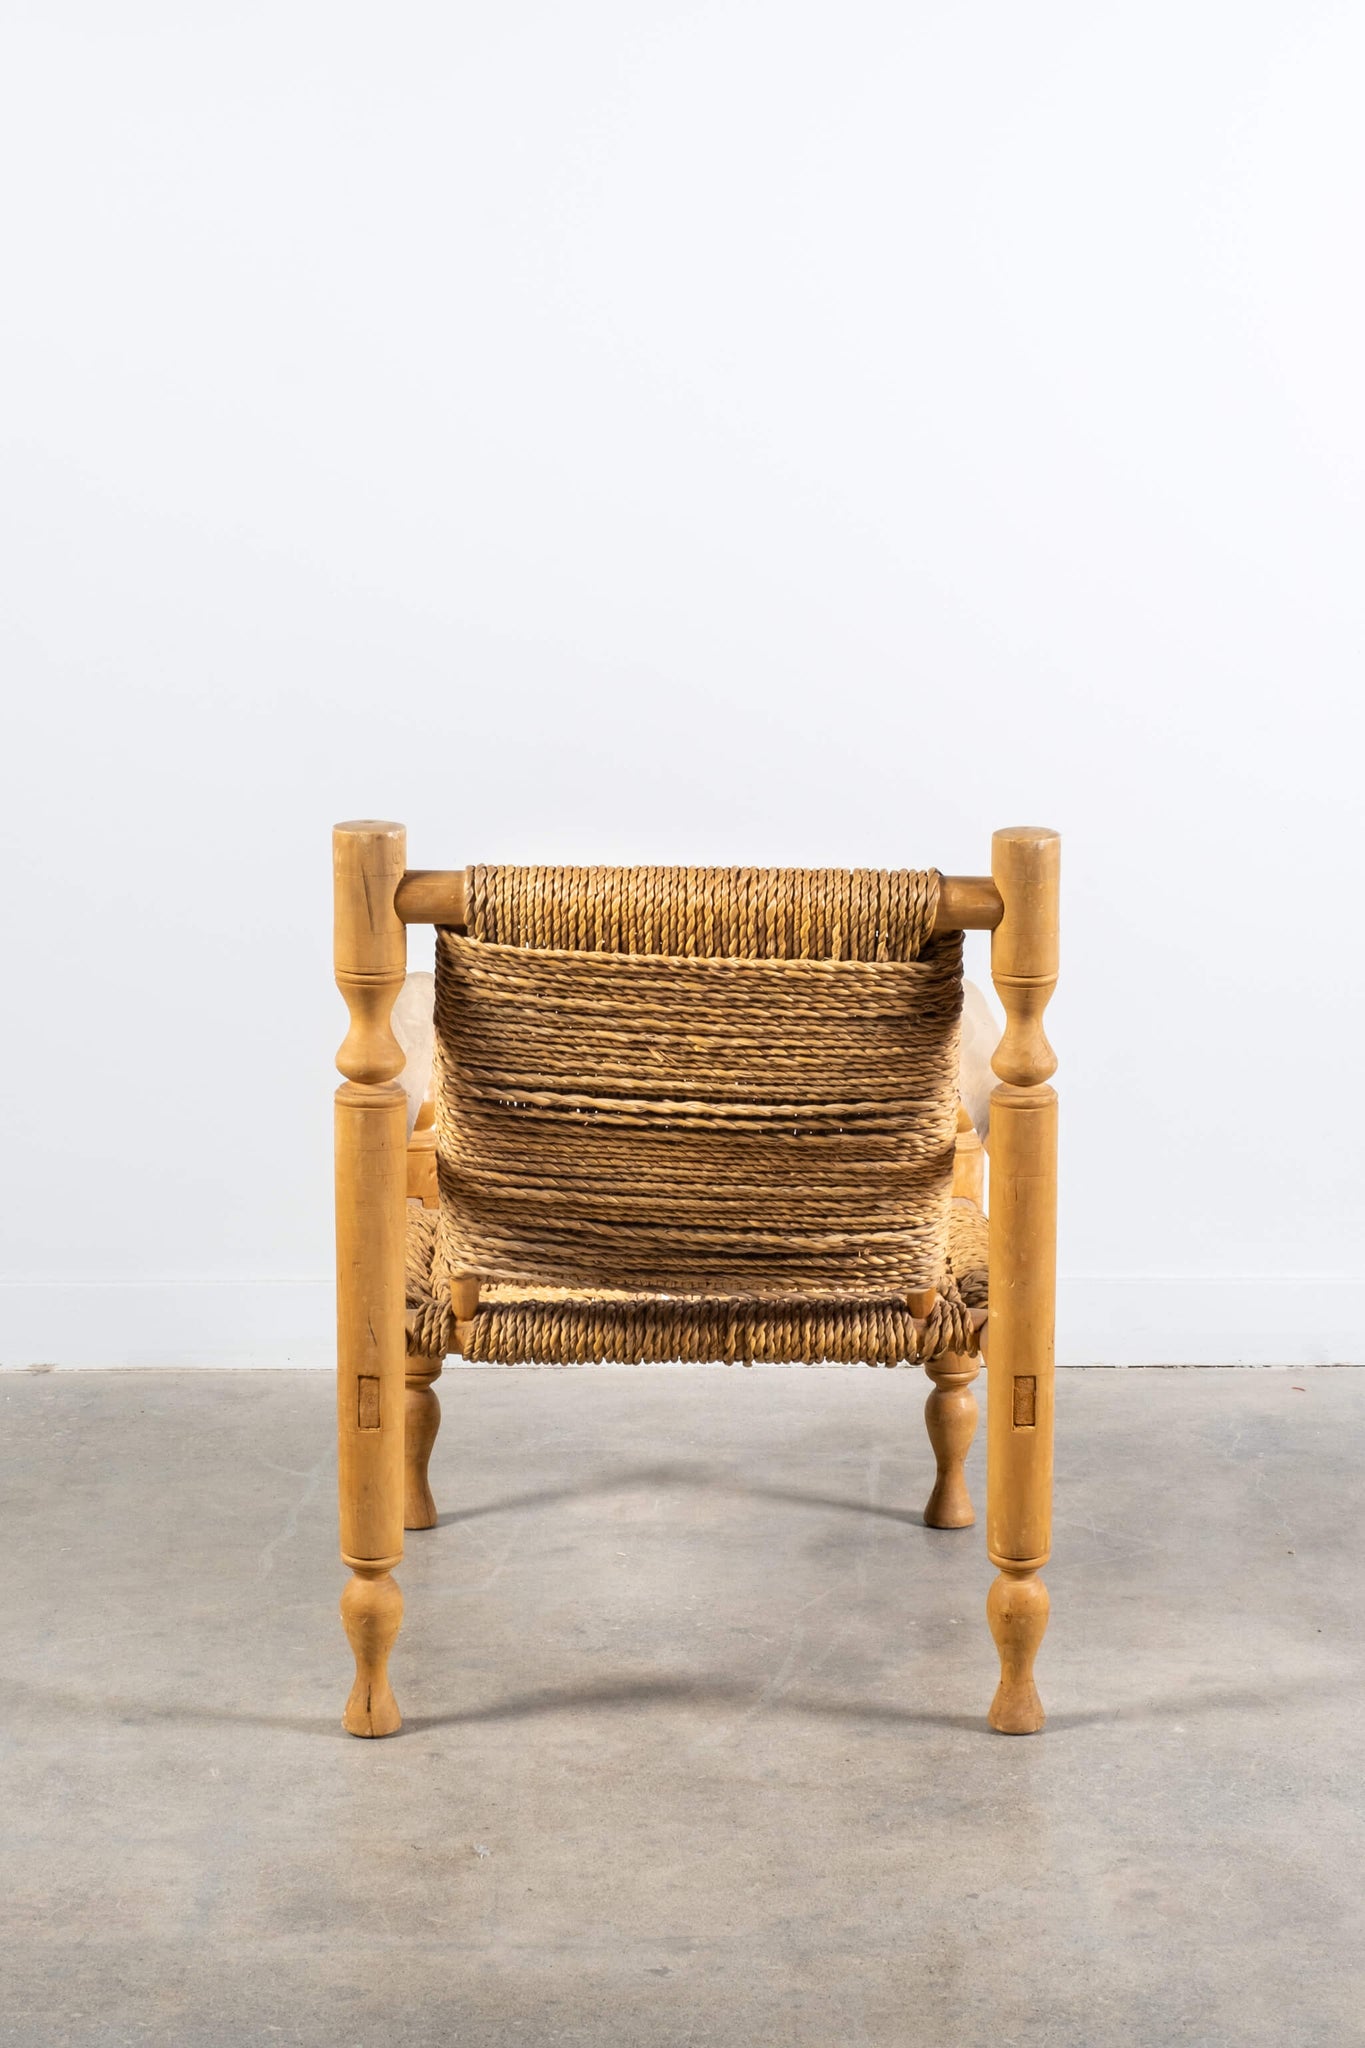 Vintage French Wood and Rope Armchairs with Footstools Adrien Audoux and Frida Minet, back view